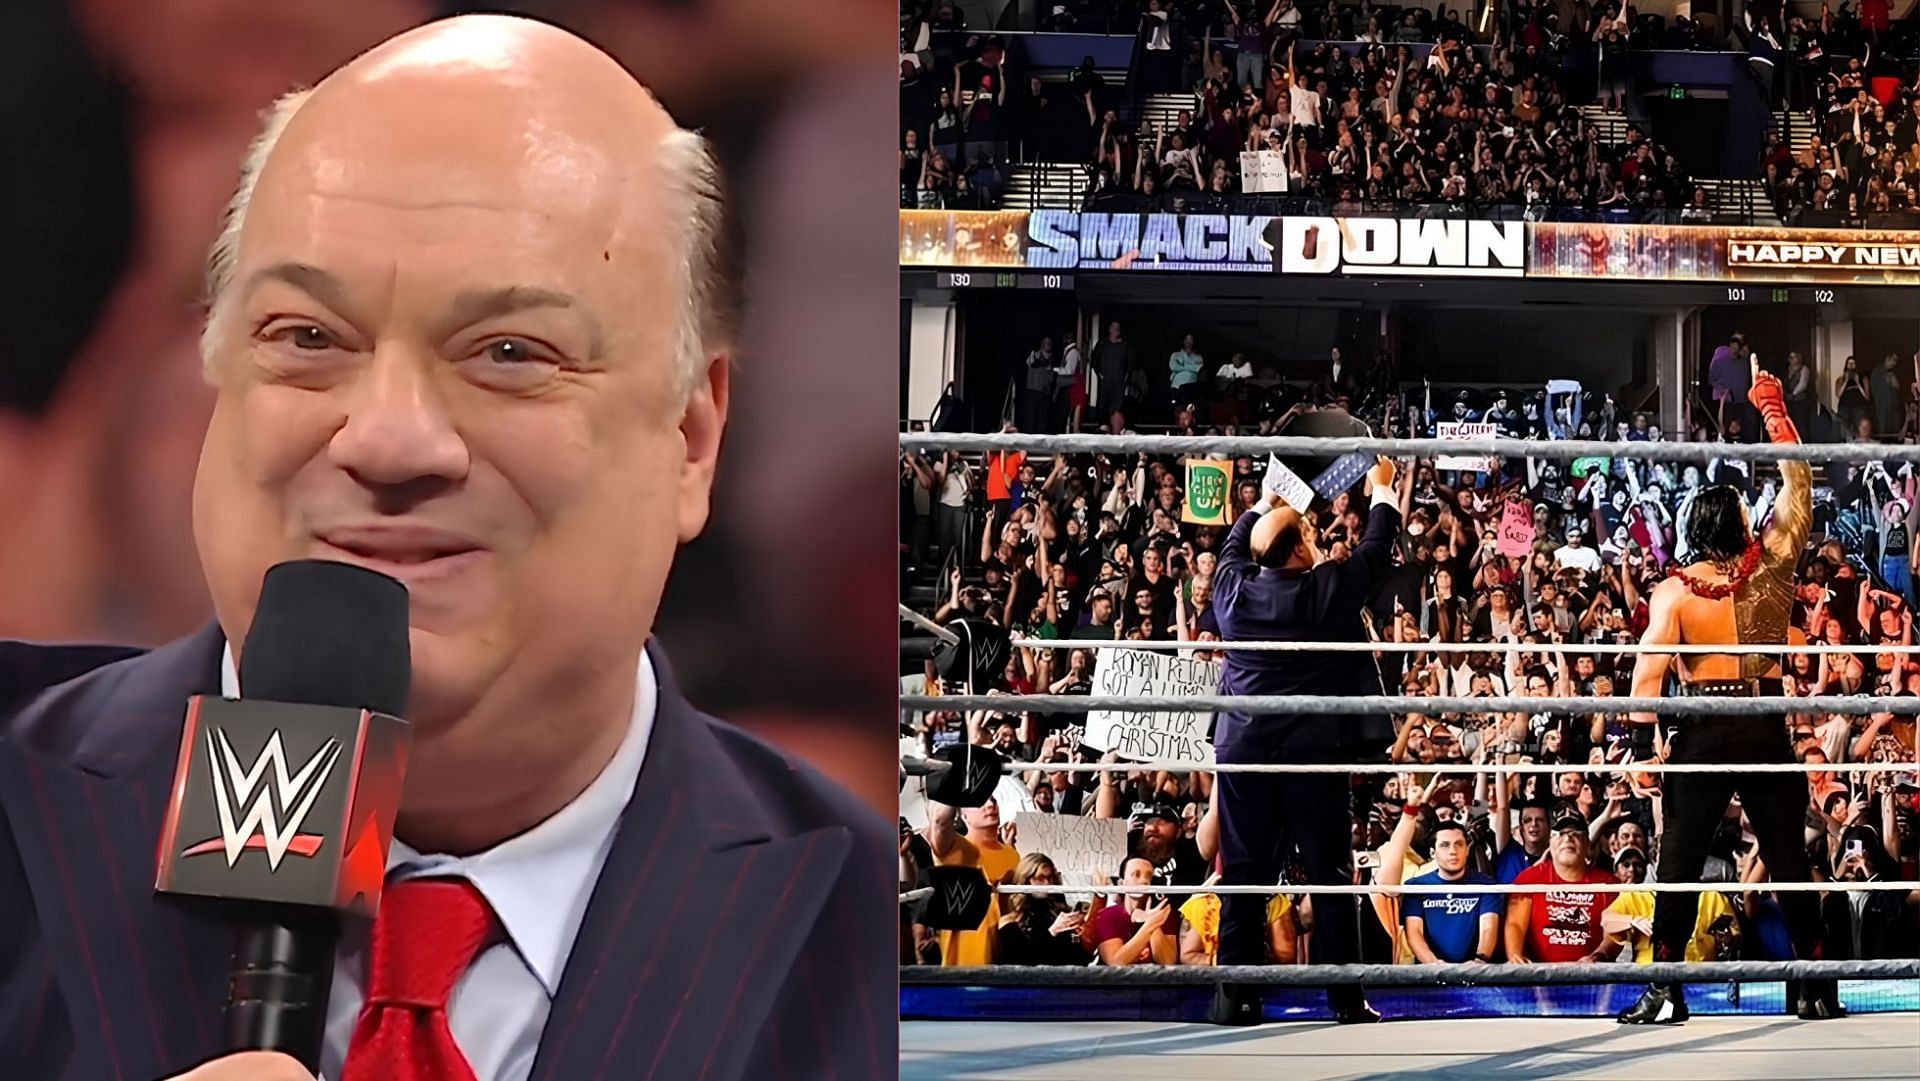 Paul Heyman is a member of the Bloodline stable